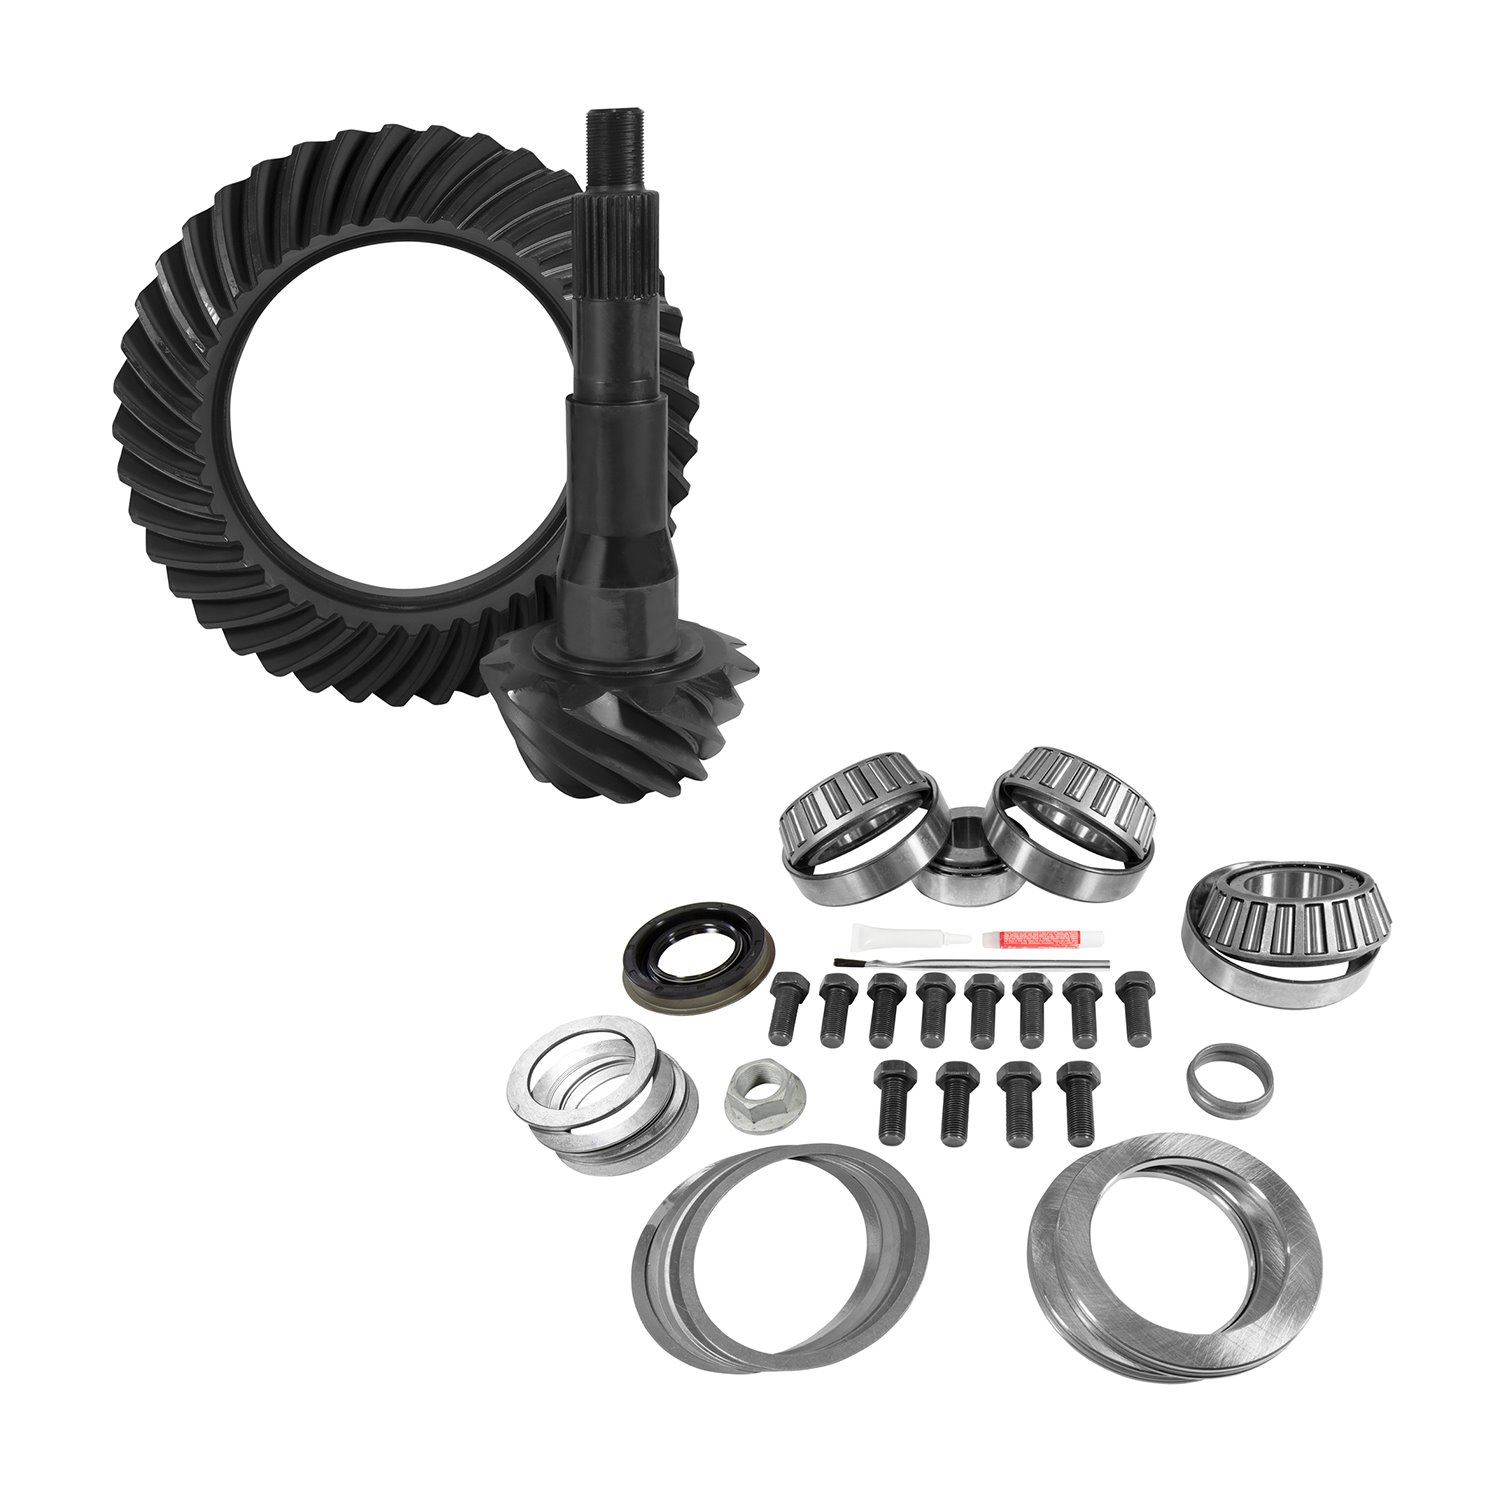 USA Standard 10844 Ring & Pinion And Install Kit, 10.5 in. Ford, 3.73 Rear